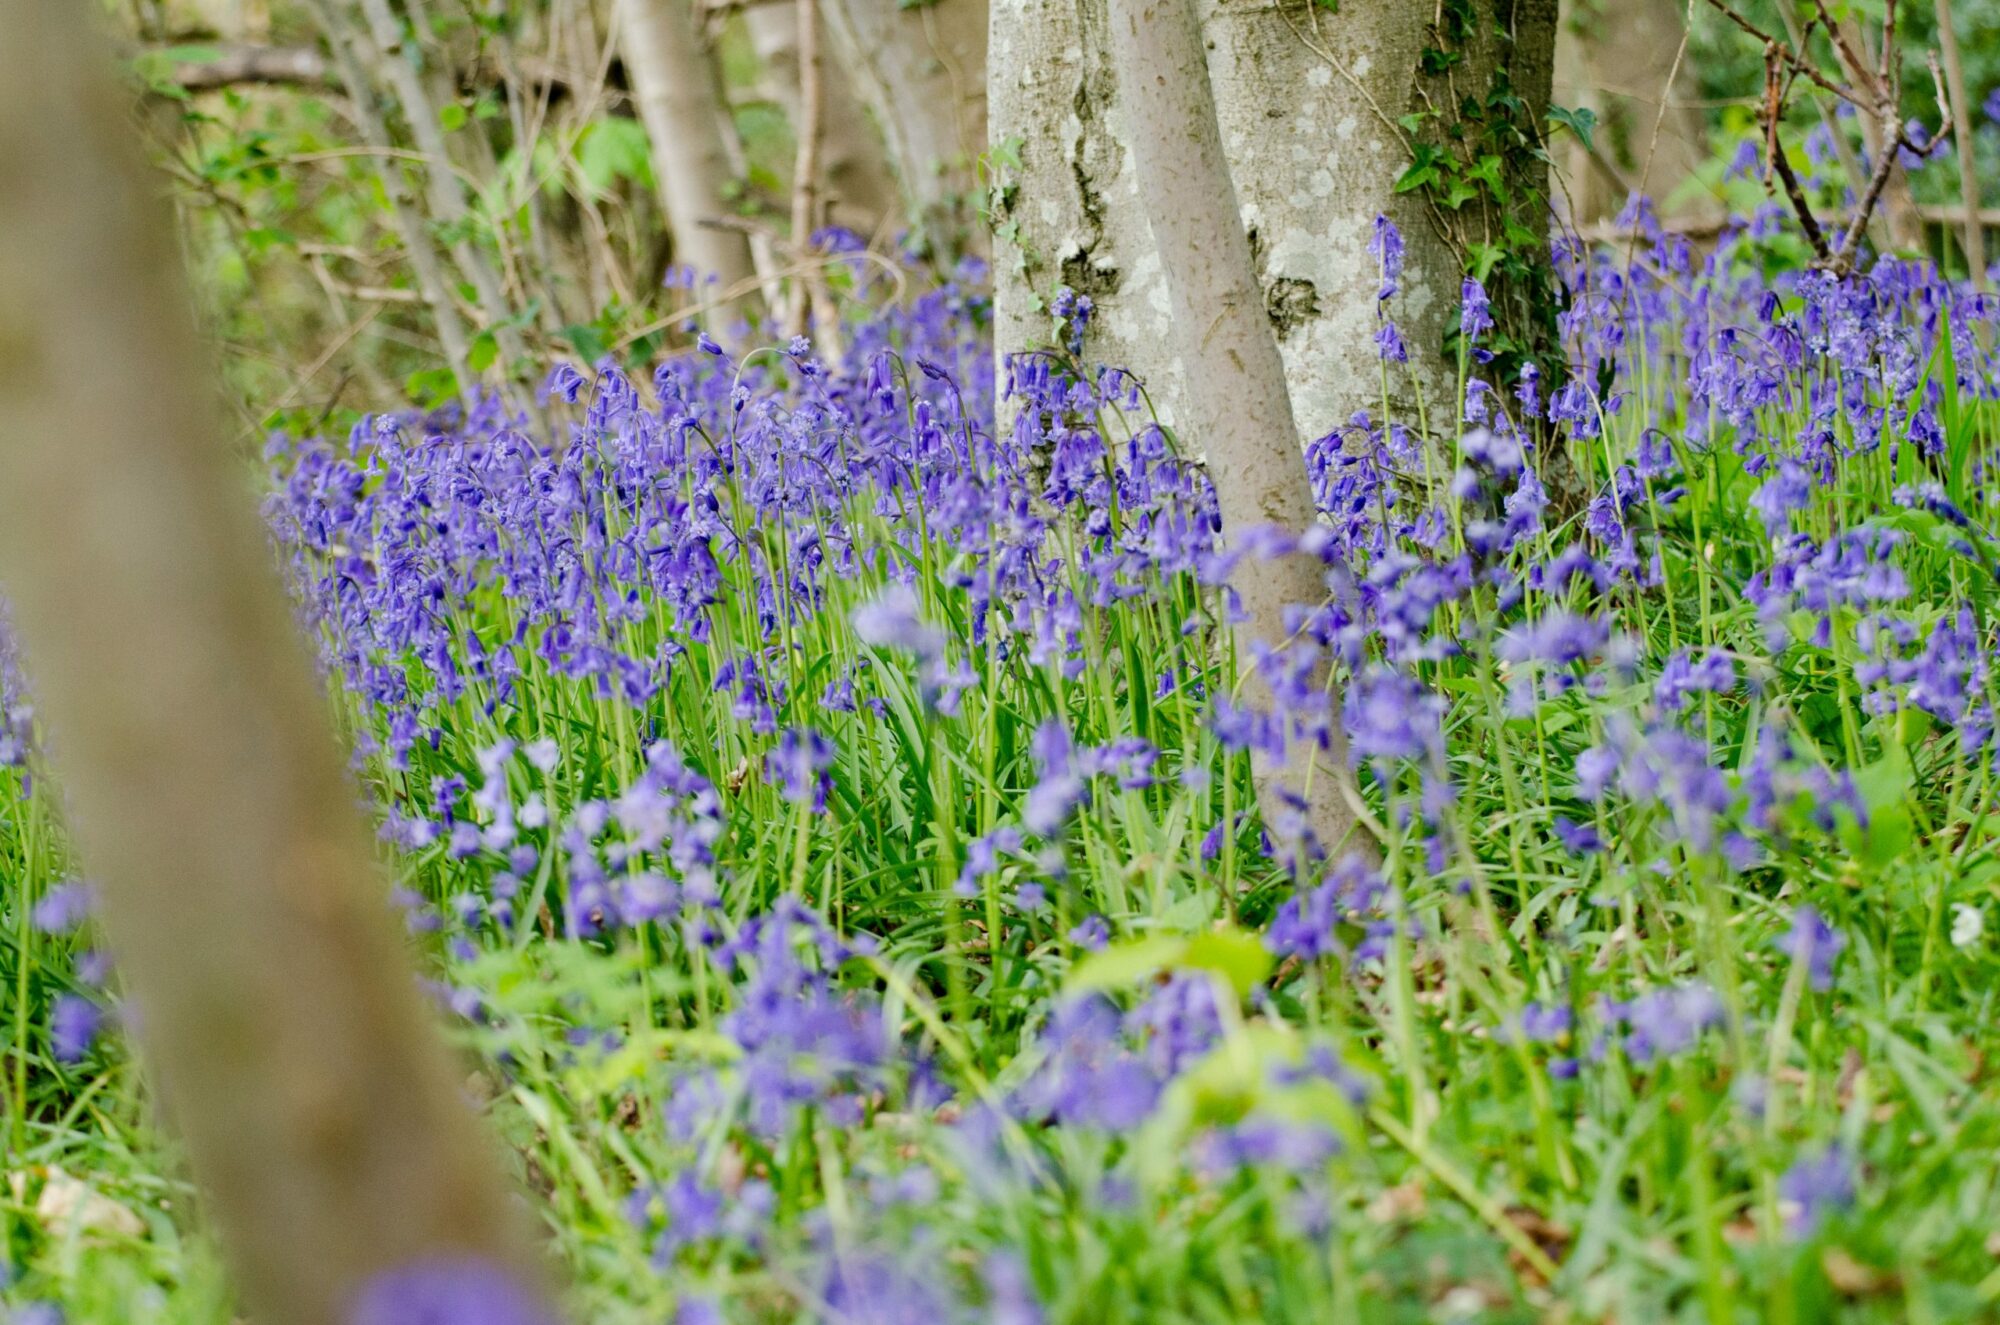 Image name Bluebells Josh Raper Conservation Media 5 scaled 1 the 9 image from the post Walking, Wellbeing and Wildlife in Yorkshire.com.